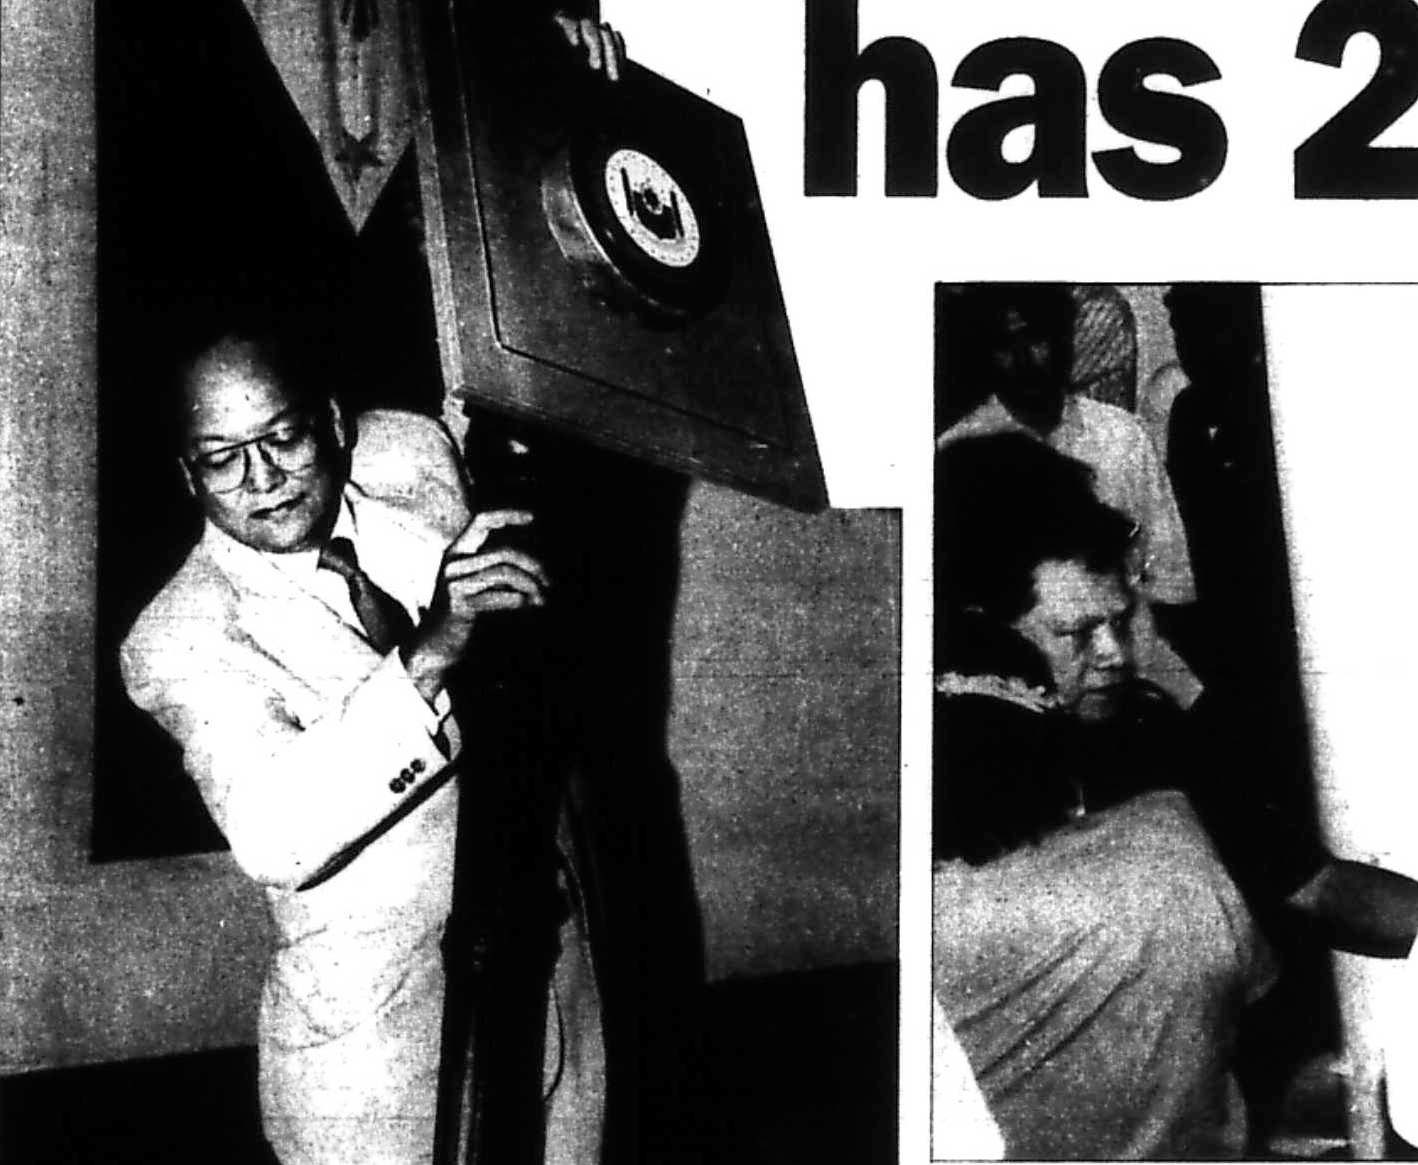 IMPROVISED MACE. Photo obtained from The Manila Times December 13, 1991 article. 